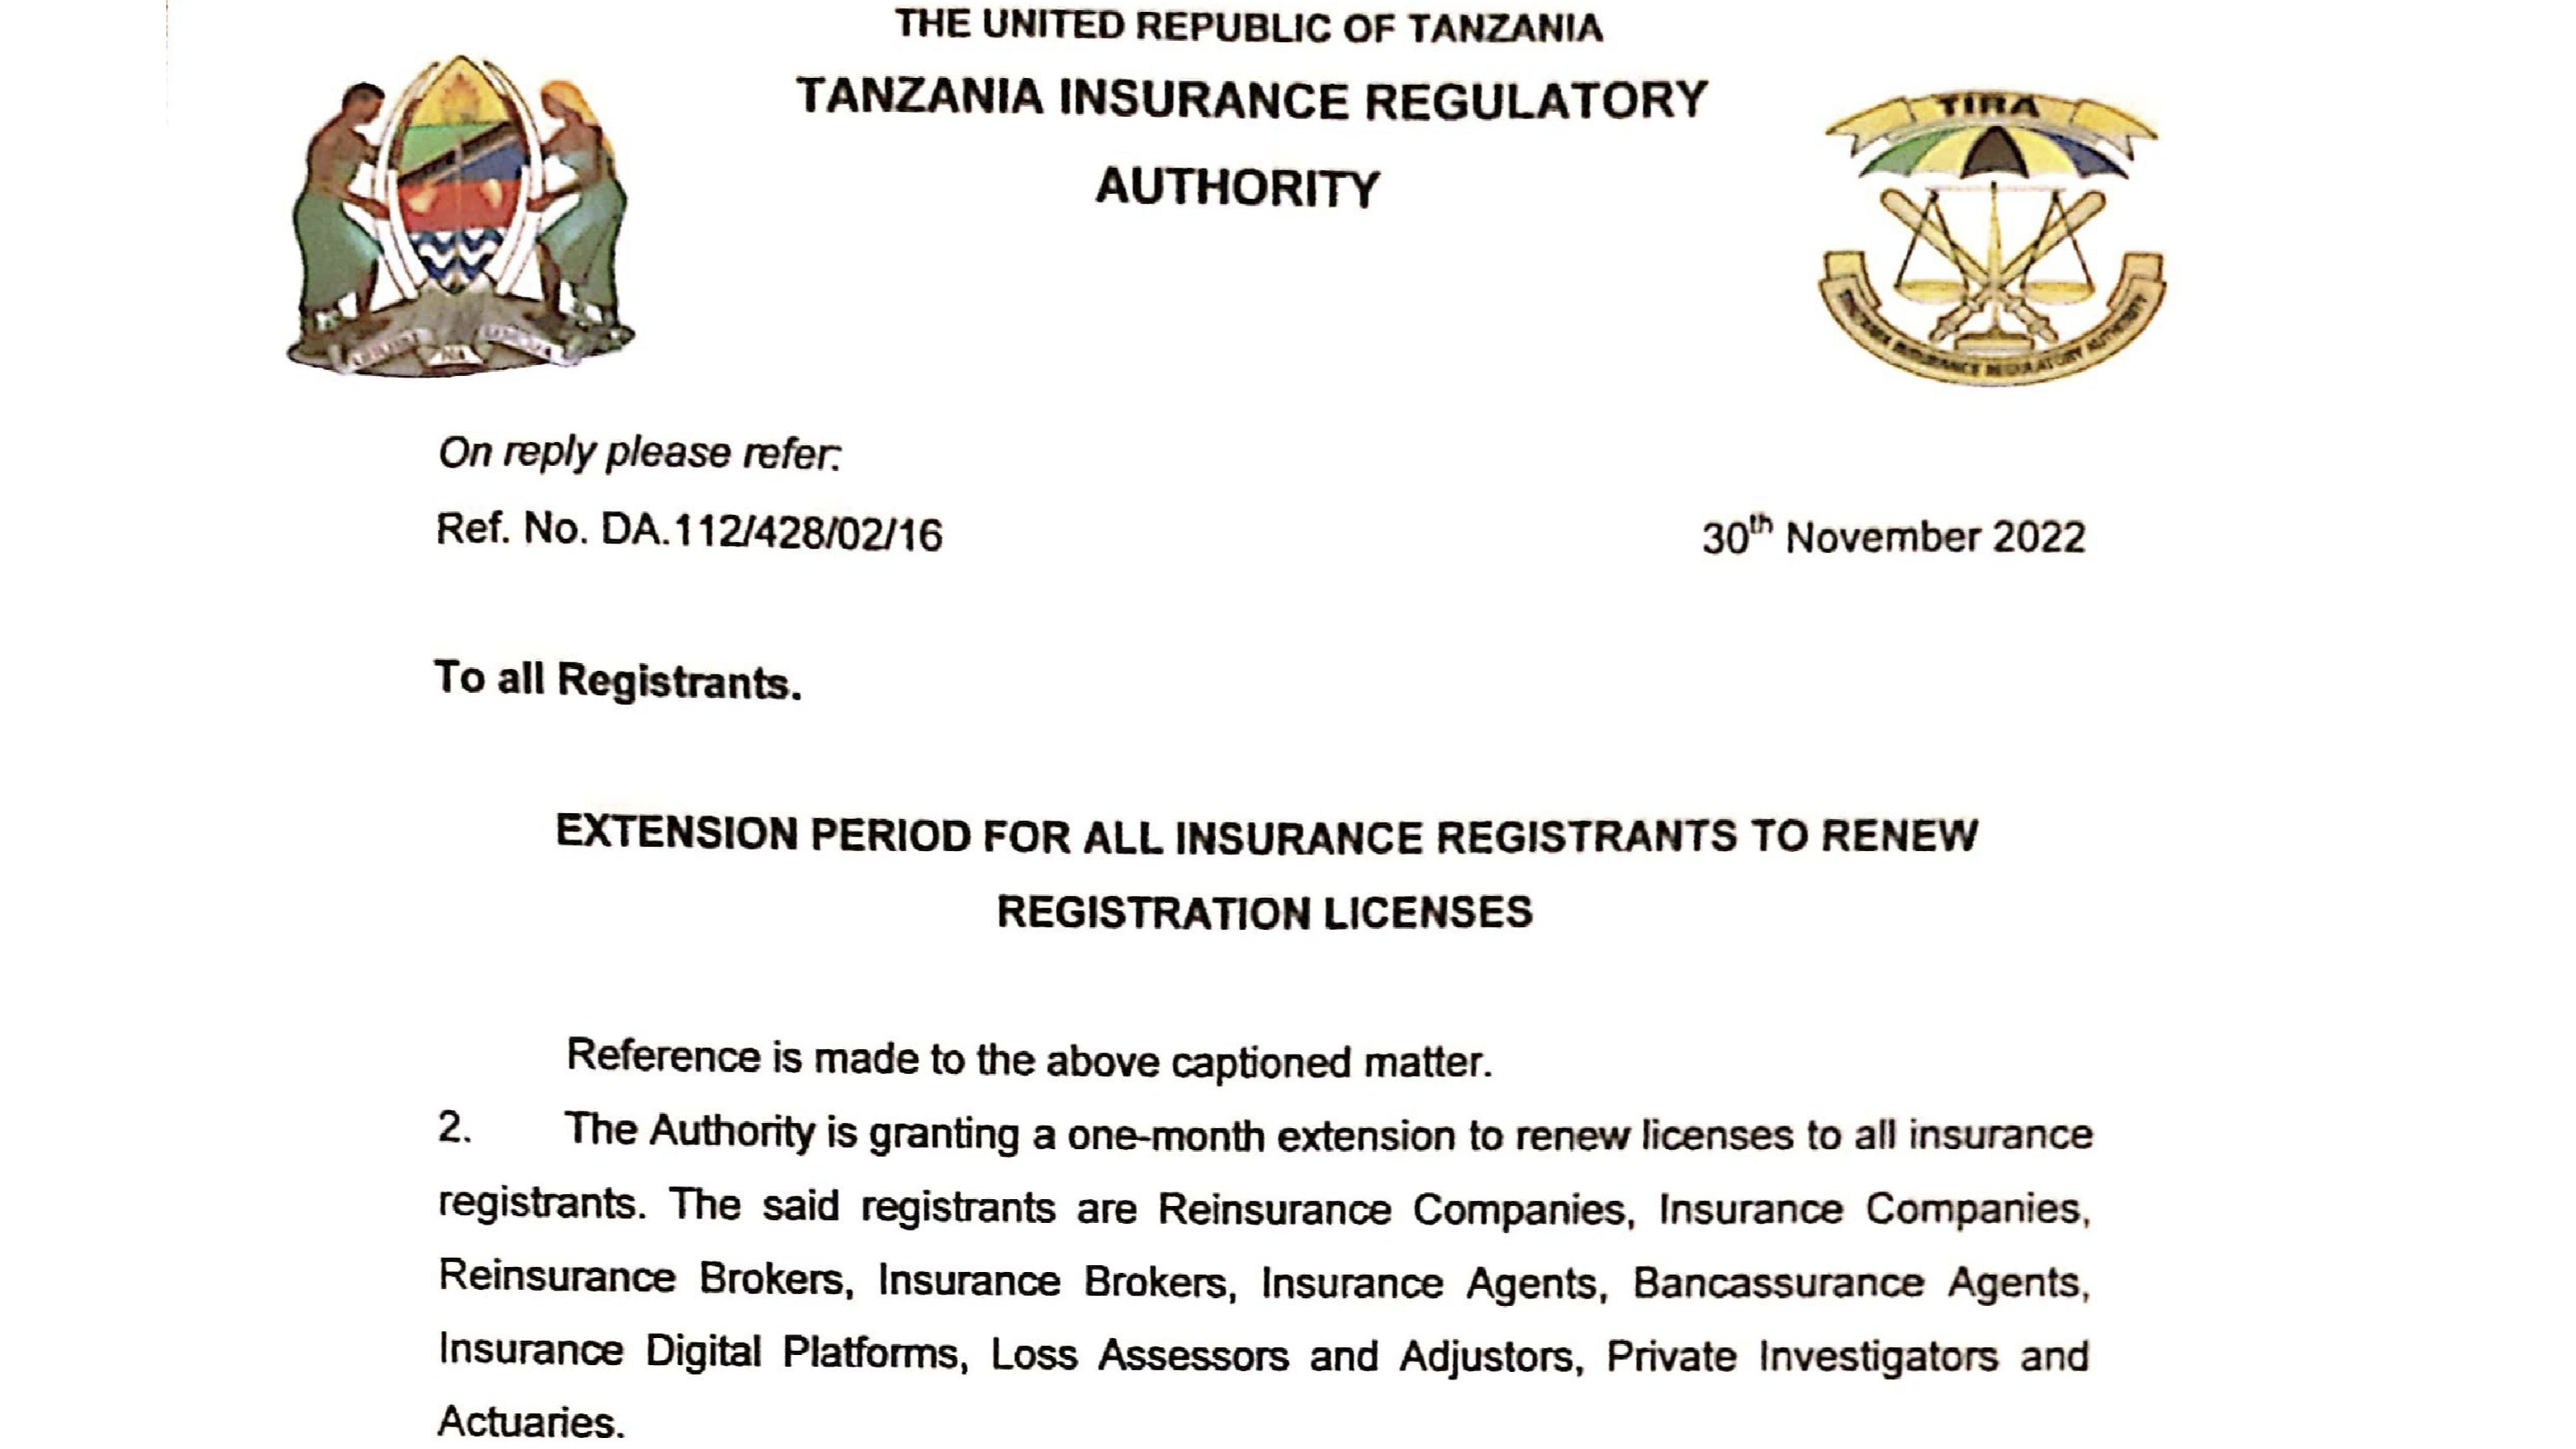 Registration licenses extension period for all Insurance Registrants to Renew